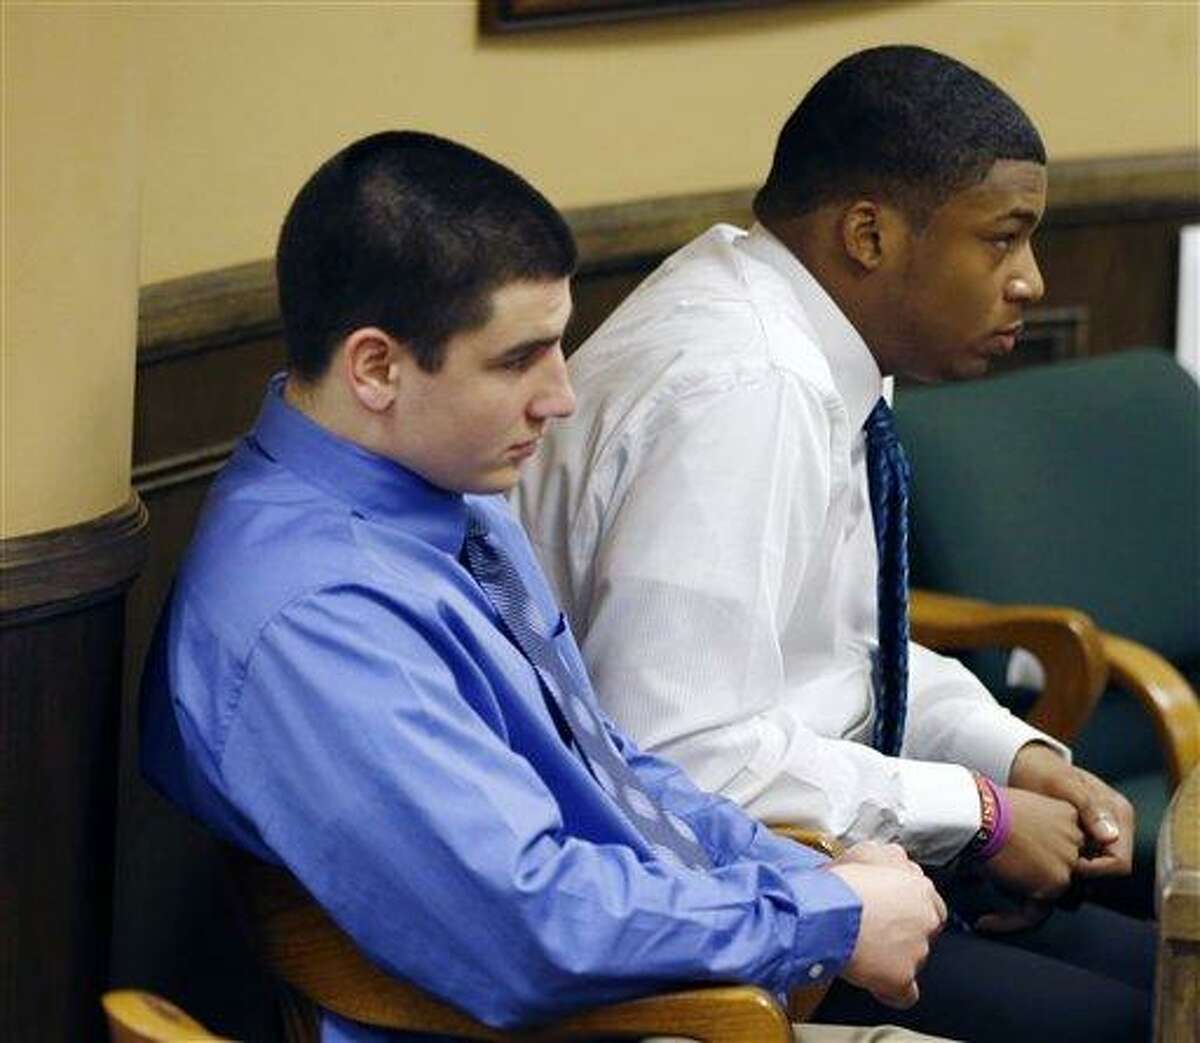 Trent Mays, 17, left, and co-defendant 16-year-old Ma'lik Richmond sit in court before the start of the third day of their trial on rape charges in juvenile court on Friday, March 15, 2013 in Steubenville, Ohio. Mays and Richmond are accused of raping a 16-year-old West Virginia girl in August of 2012. (AP Photo/Keith Srakocic, Pool)